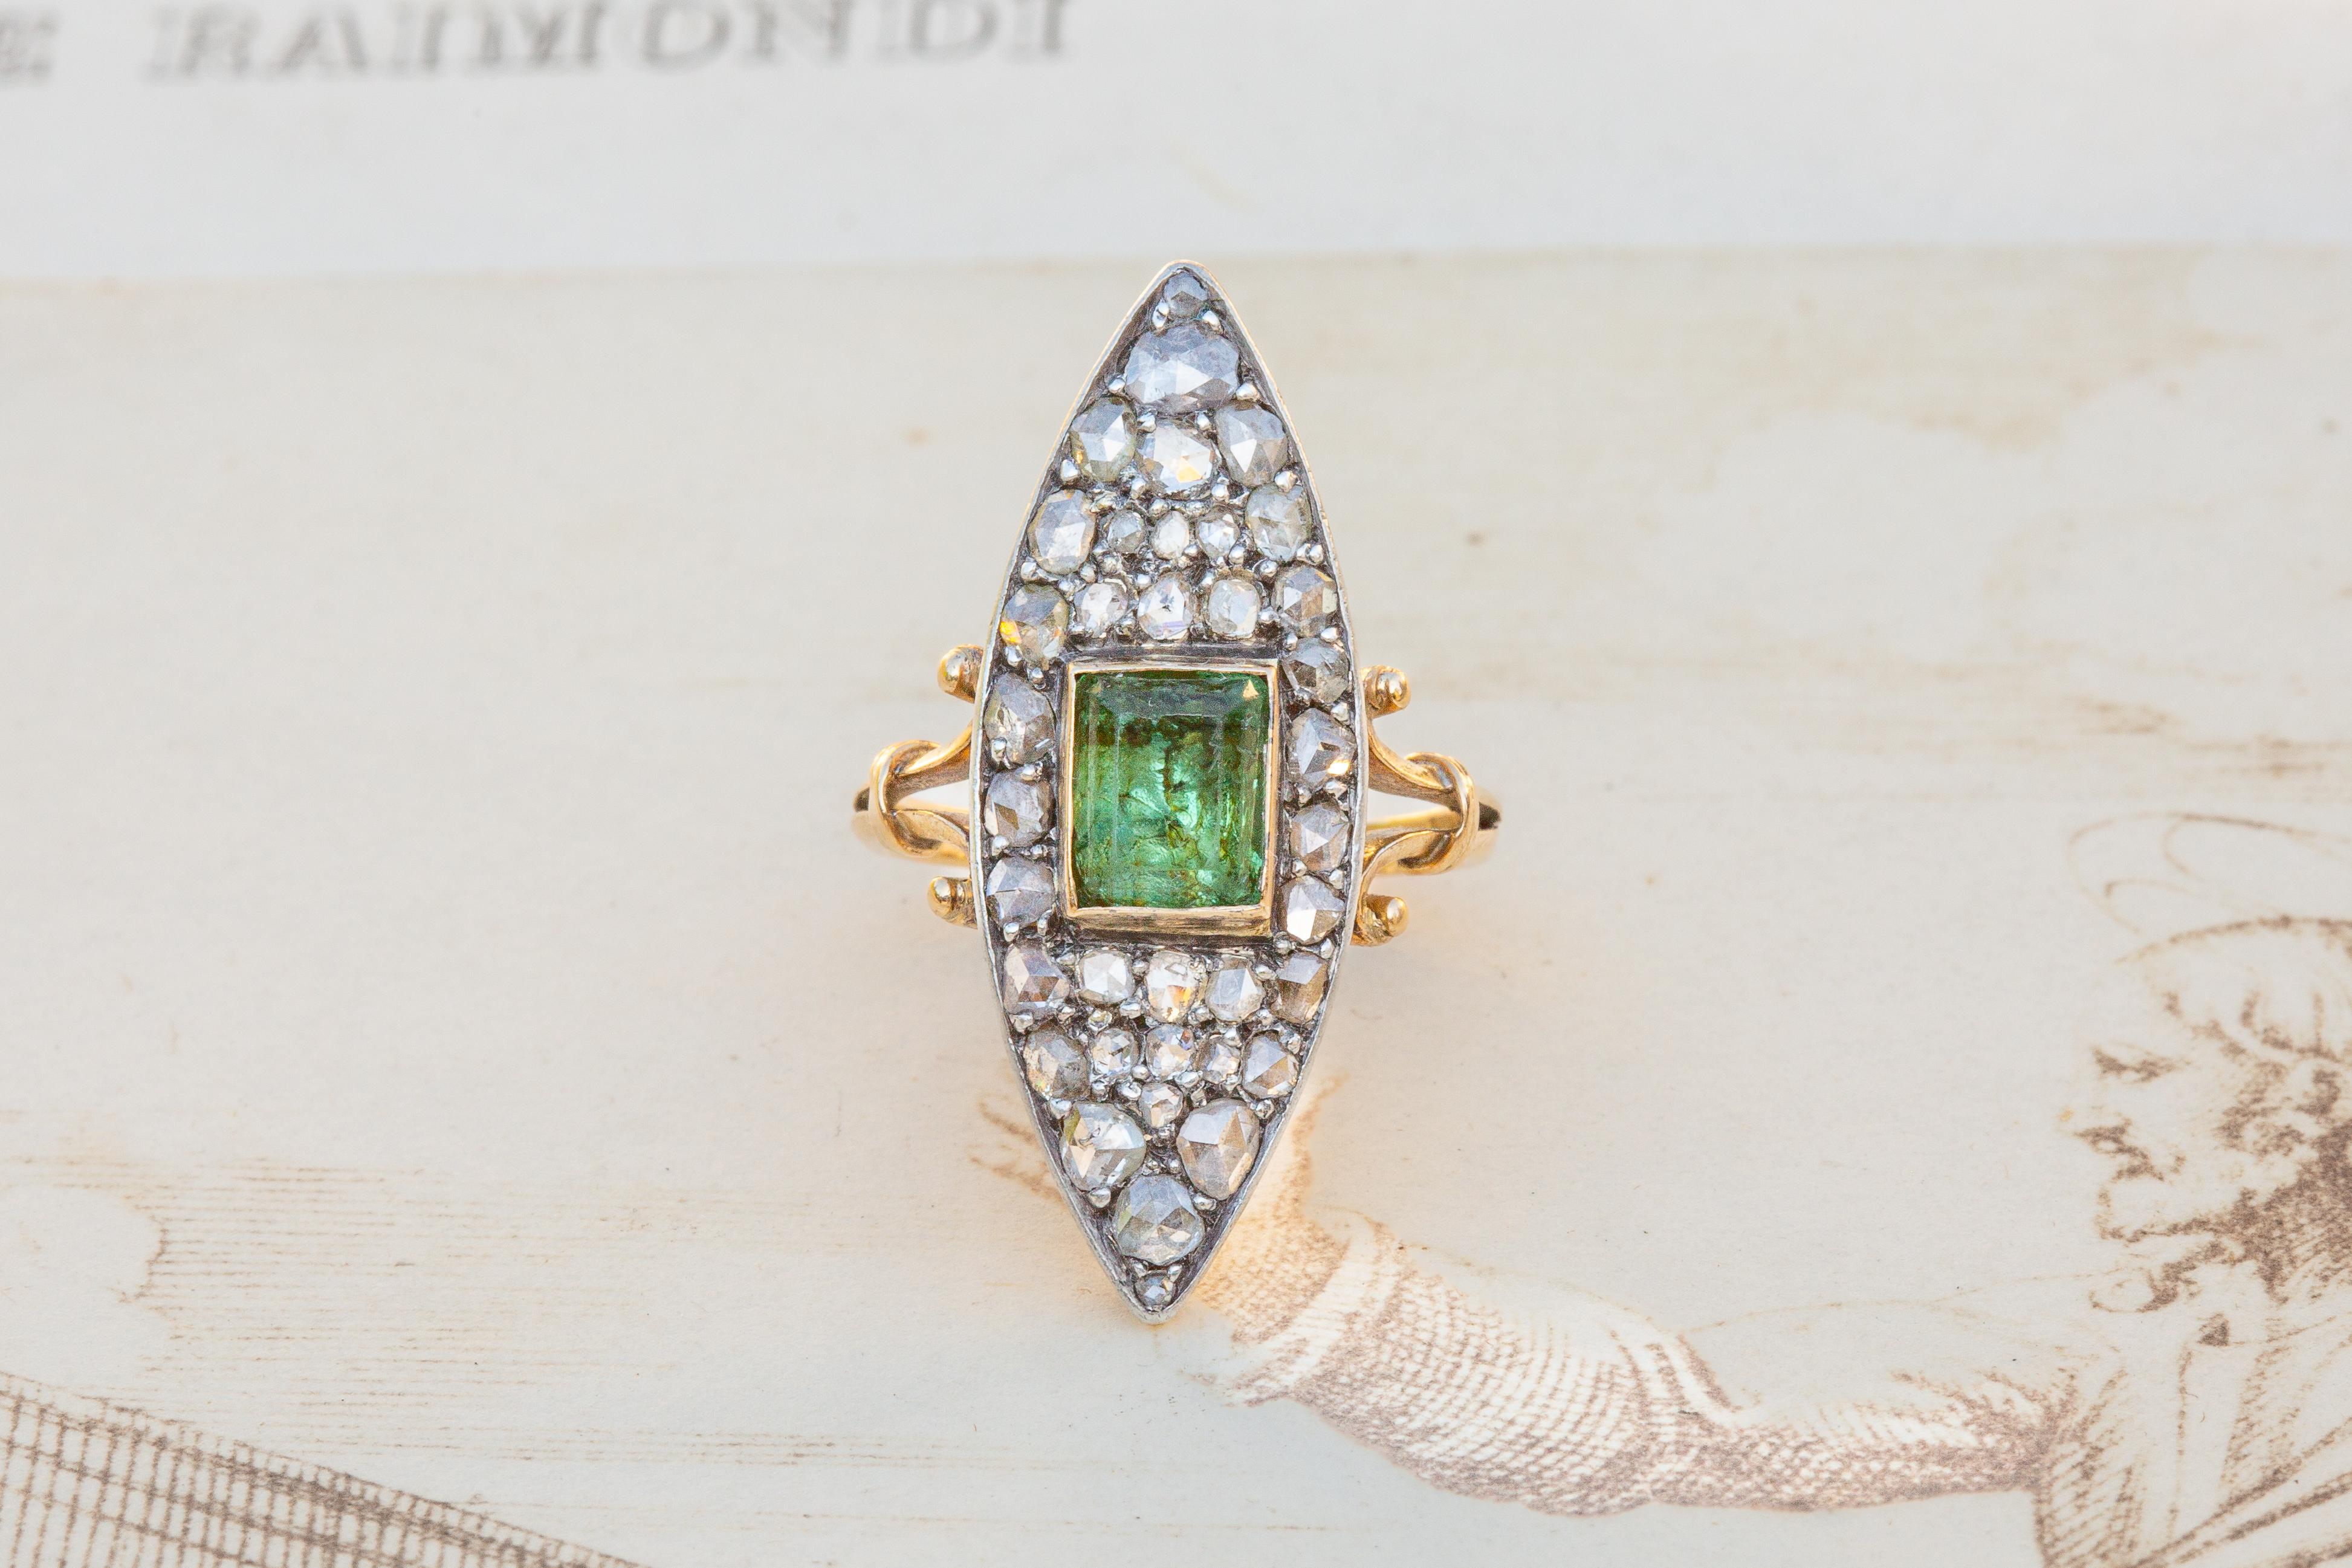 A truly stunning antique Victorian 18K gold ring dating to around 1890. This navette-shaped cluster is constructed with 37 silver set rose cut diamonds surrounding an emerald cut peridot gemstone. The gorgeous pale green peridot is foil-backed and